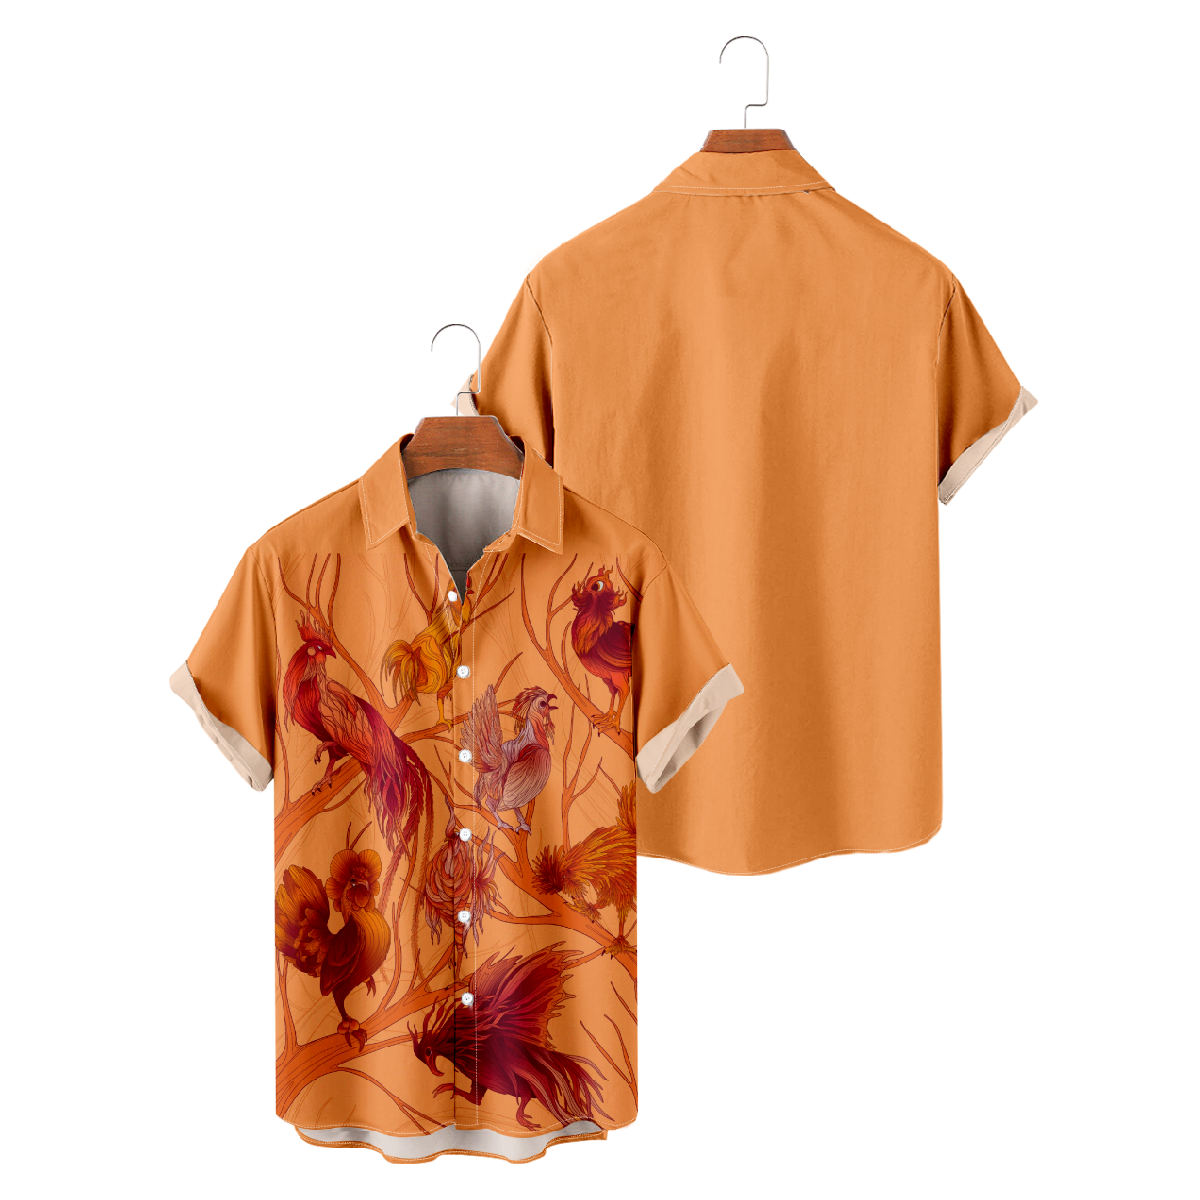 Rooster Button Up Shirt for Men Hawaiian Shirt Short Sleeve Breathable